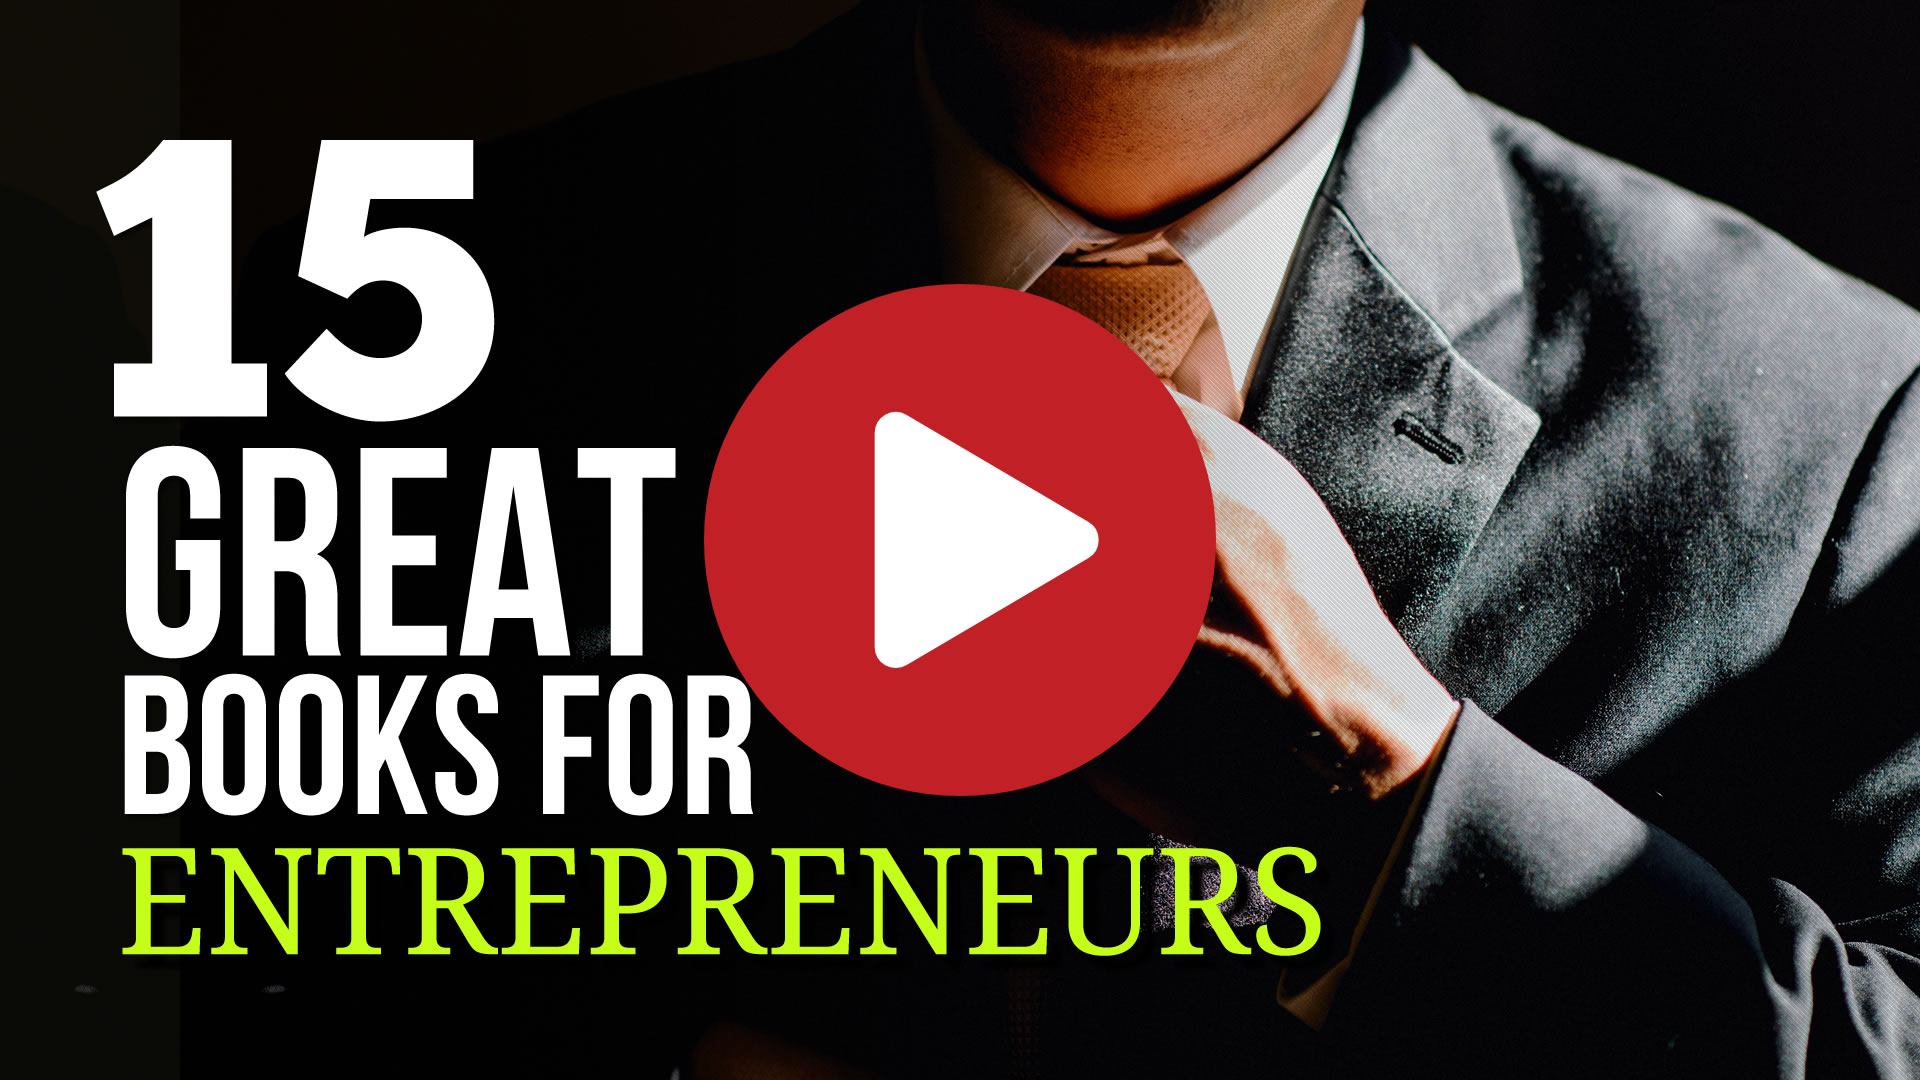 15 Great Books for Entrepreneurs on Launching and Running a Business